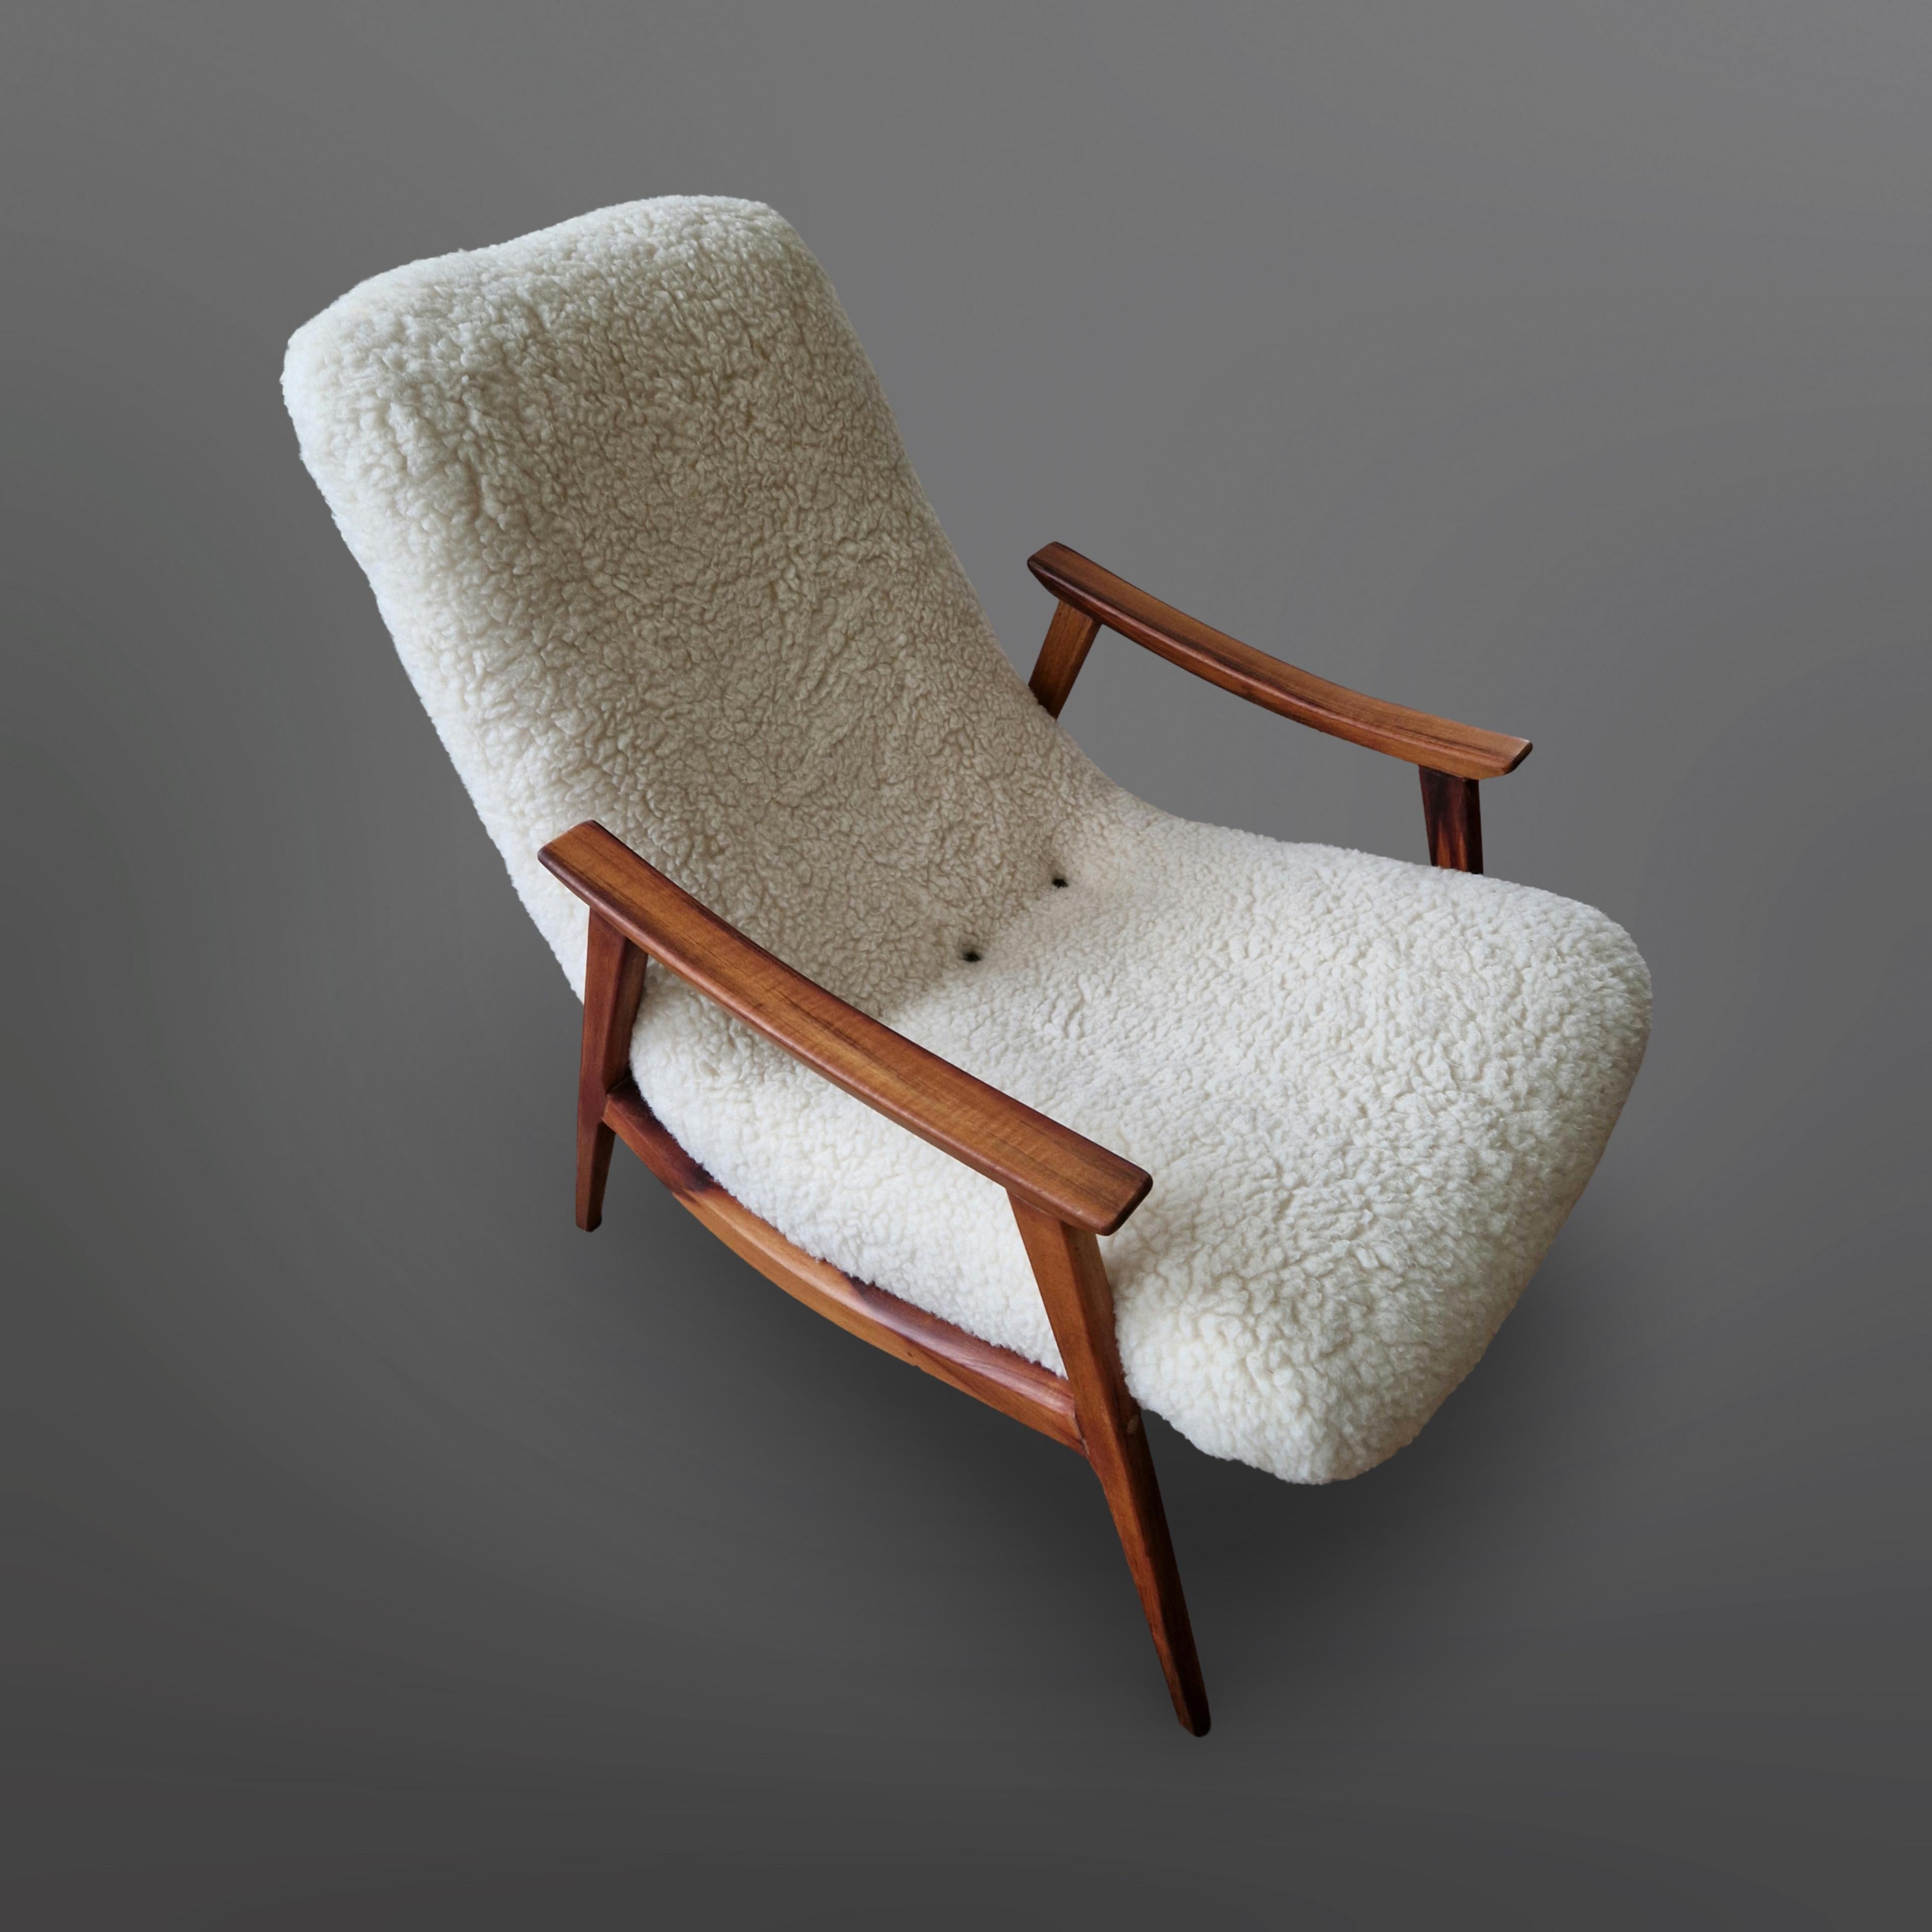 Fully restored mid century modern lounge chair. Made by Gelli industry de móveis in the 1950s.
The frame is made from rosewood with a rich and deep color and magnificent graining. The one piece seat follows the elegant curves of the frame. The frame